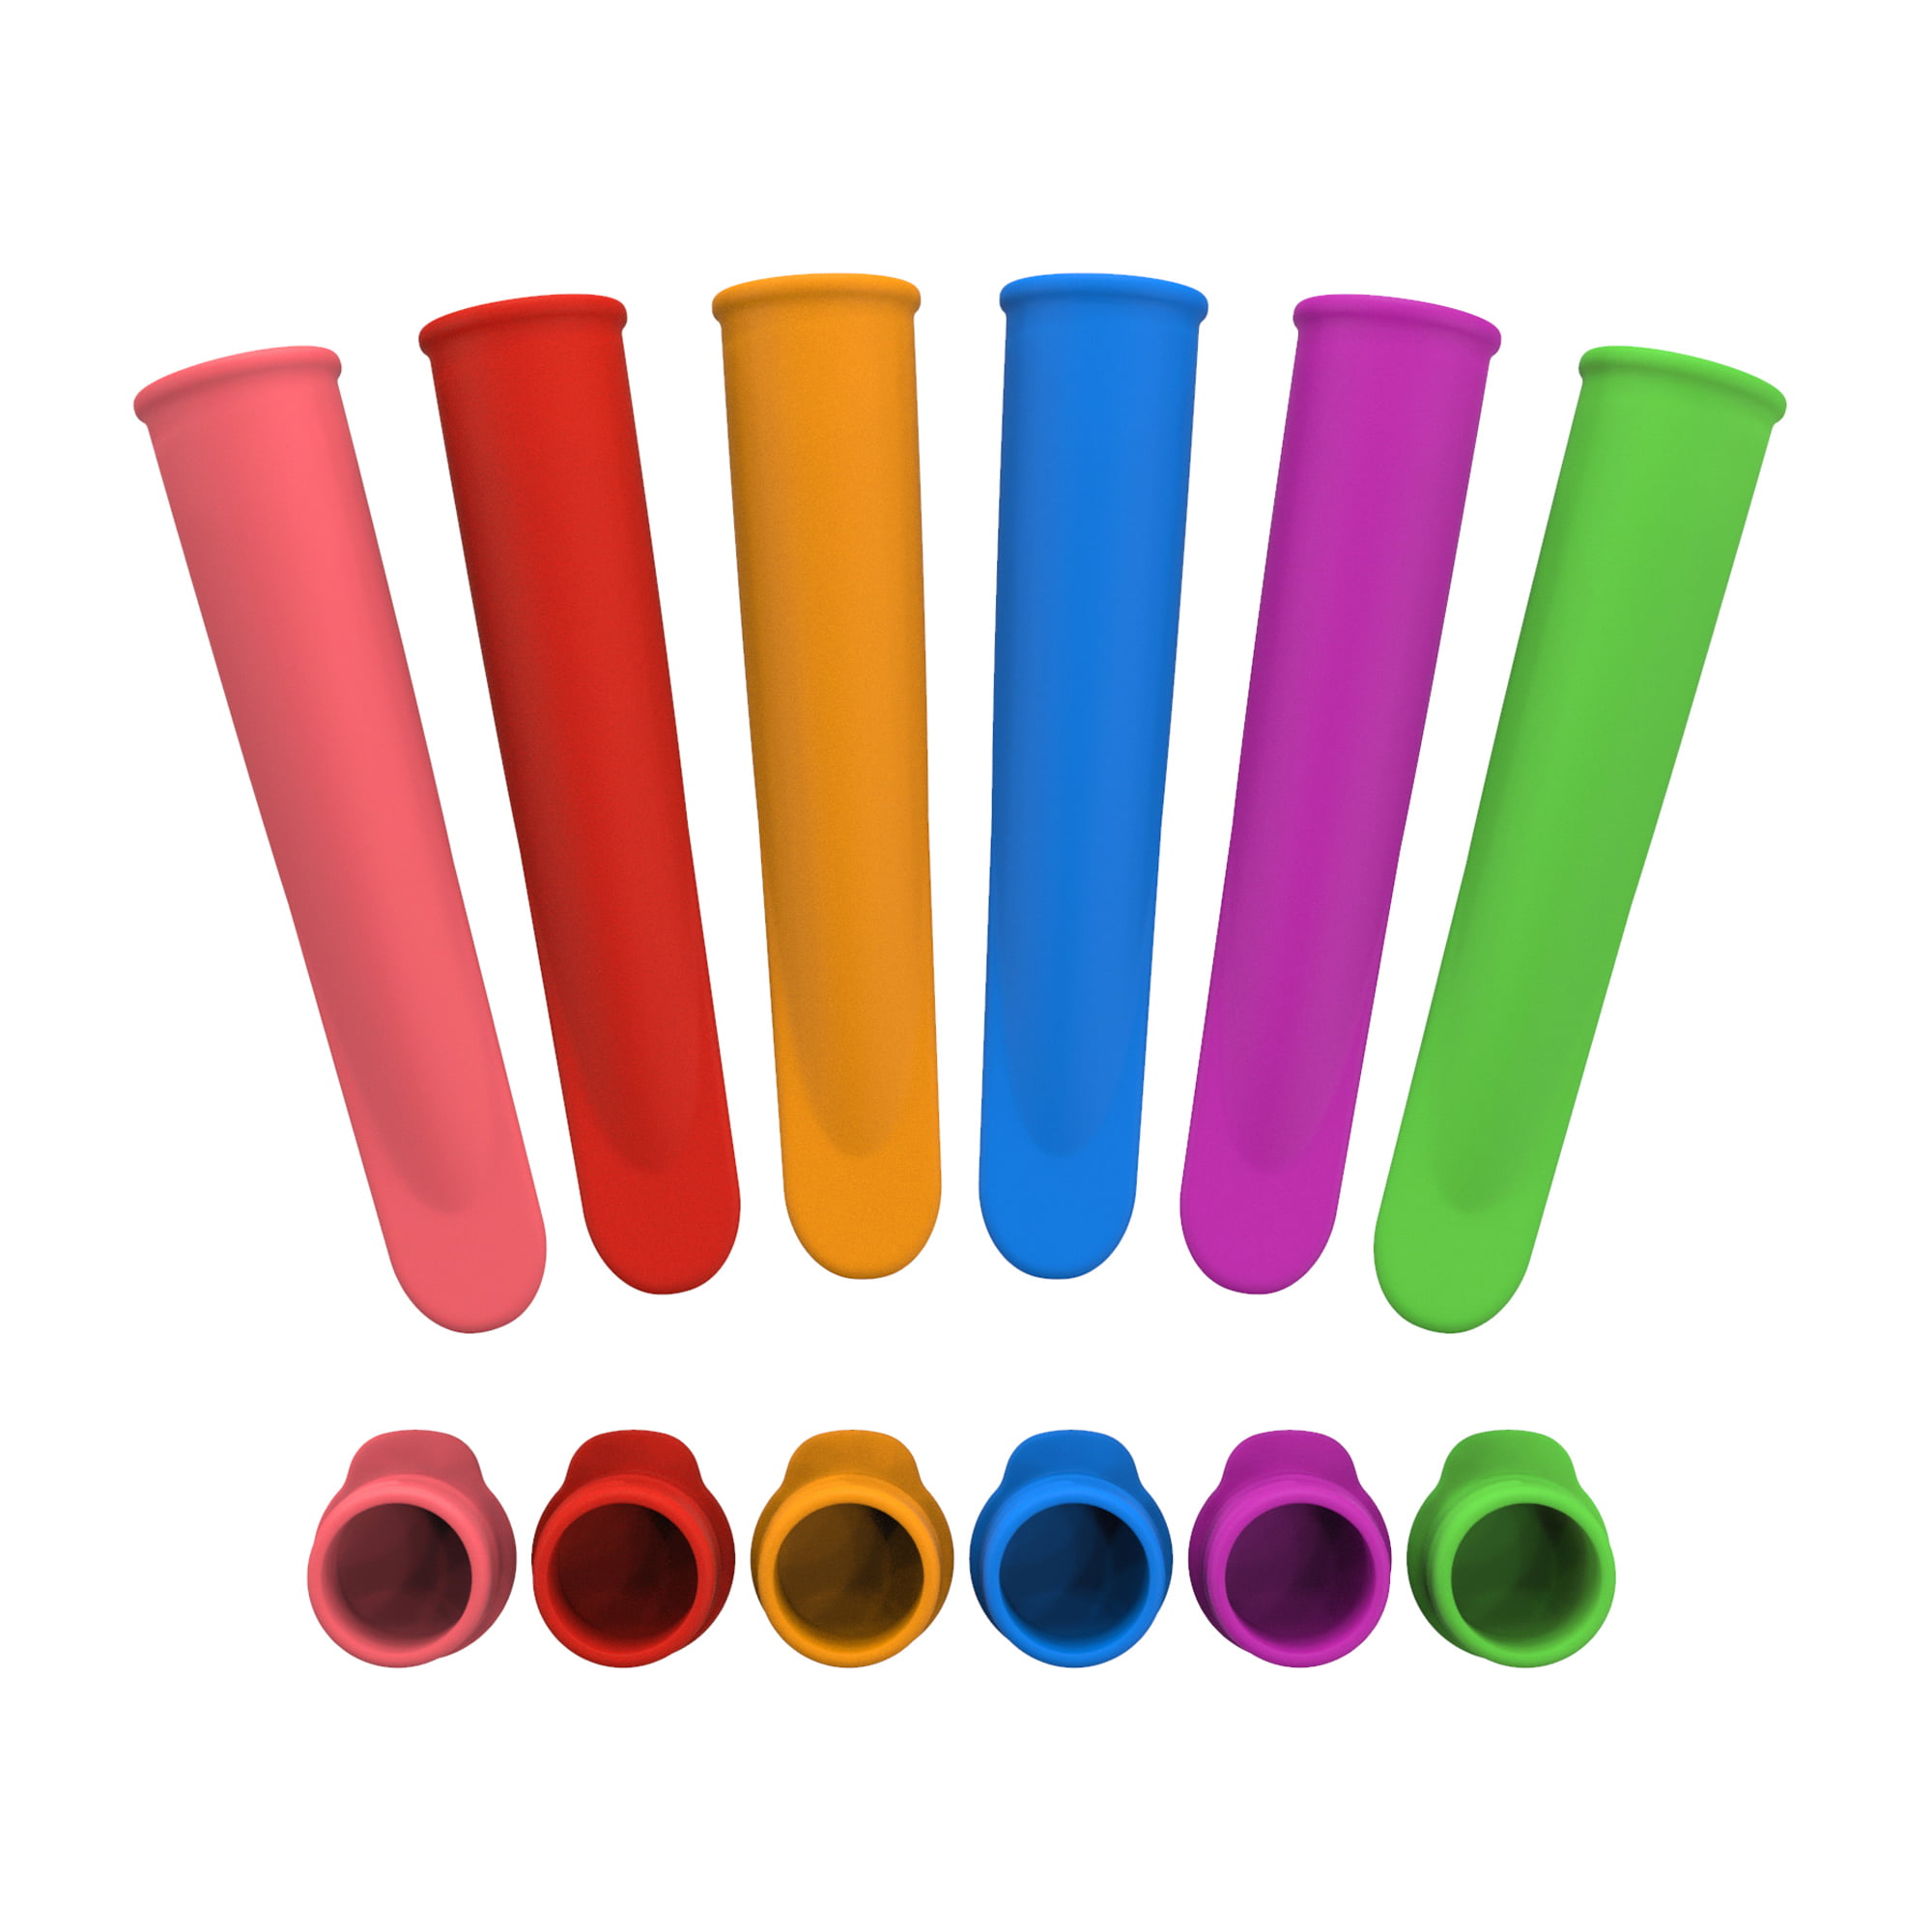 Simple Plastic Set Of 6 Popsicle Ice Pop Maker Assorted Color For